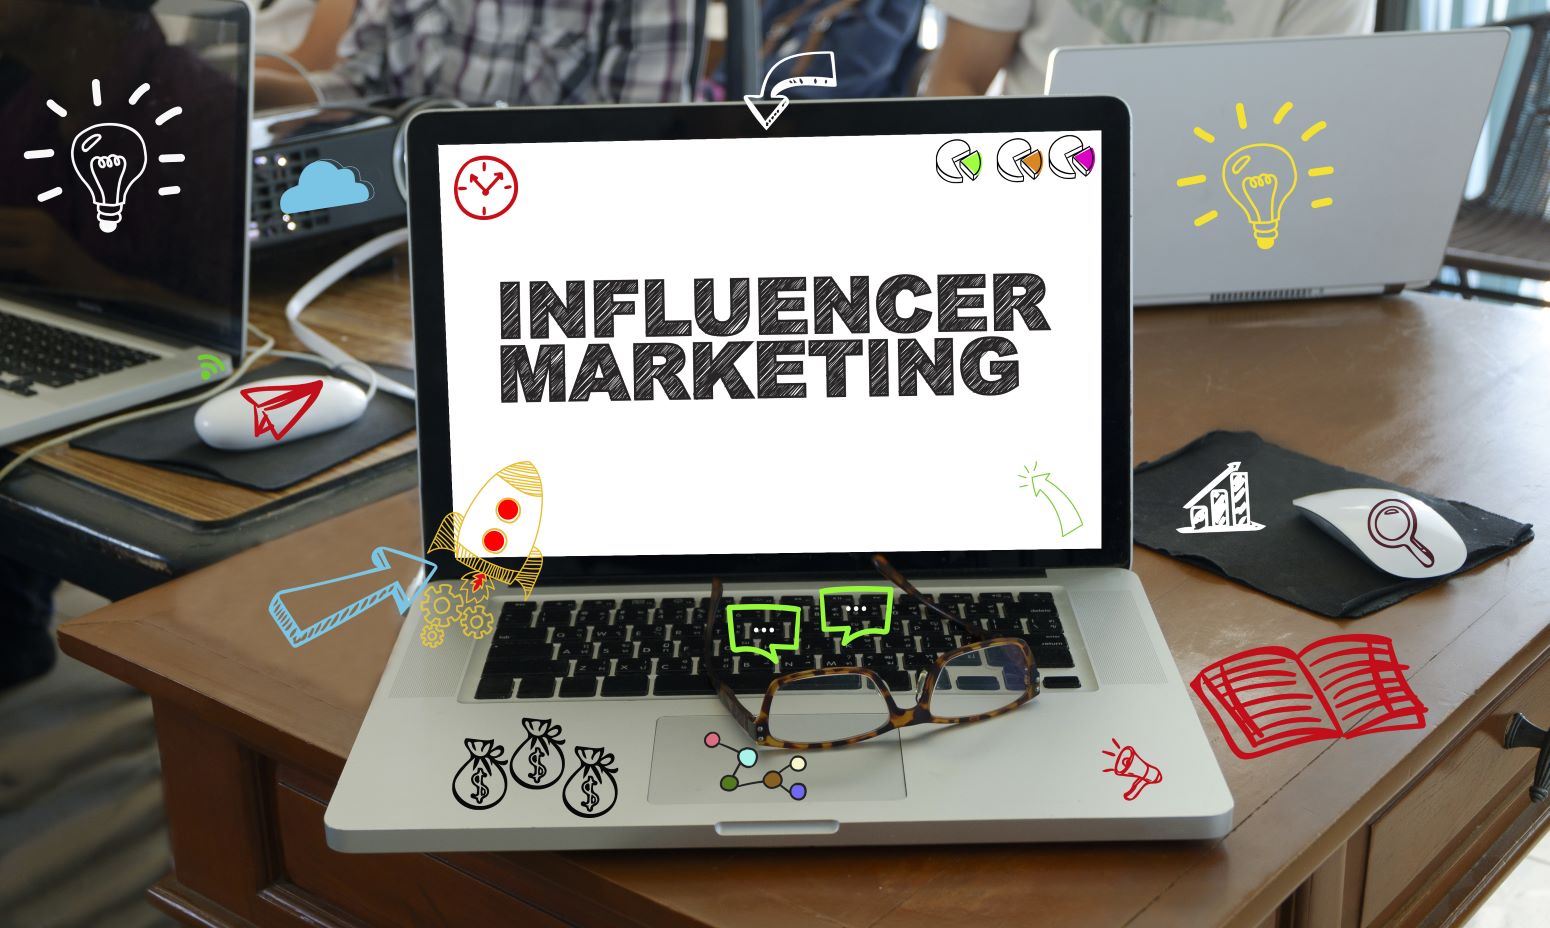 How Chatbot Marketing Benefits Your Influencer Business